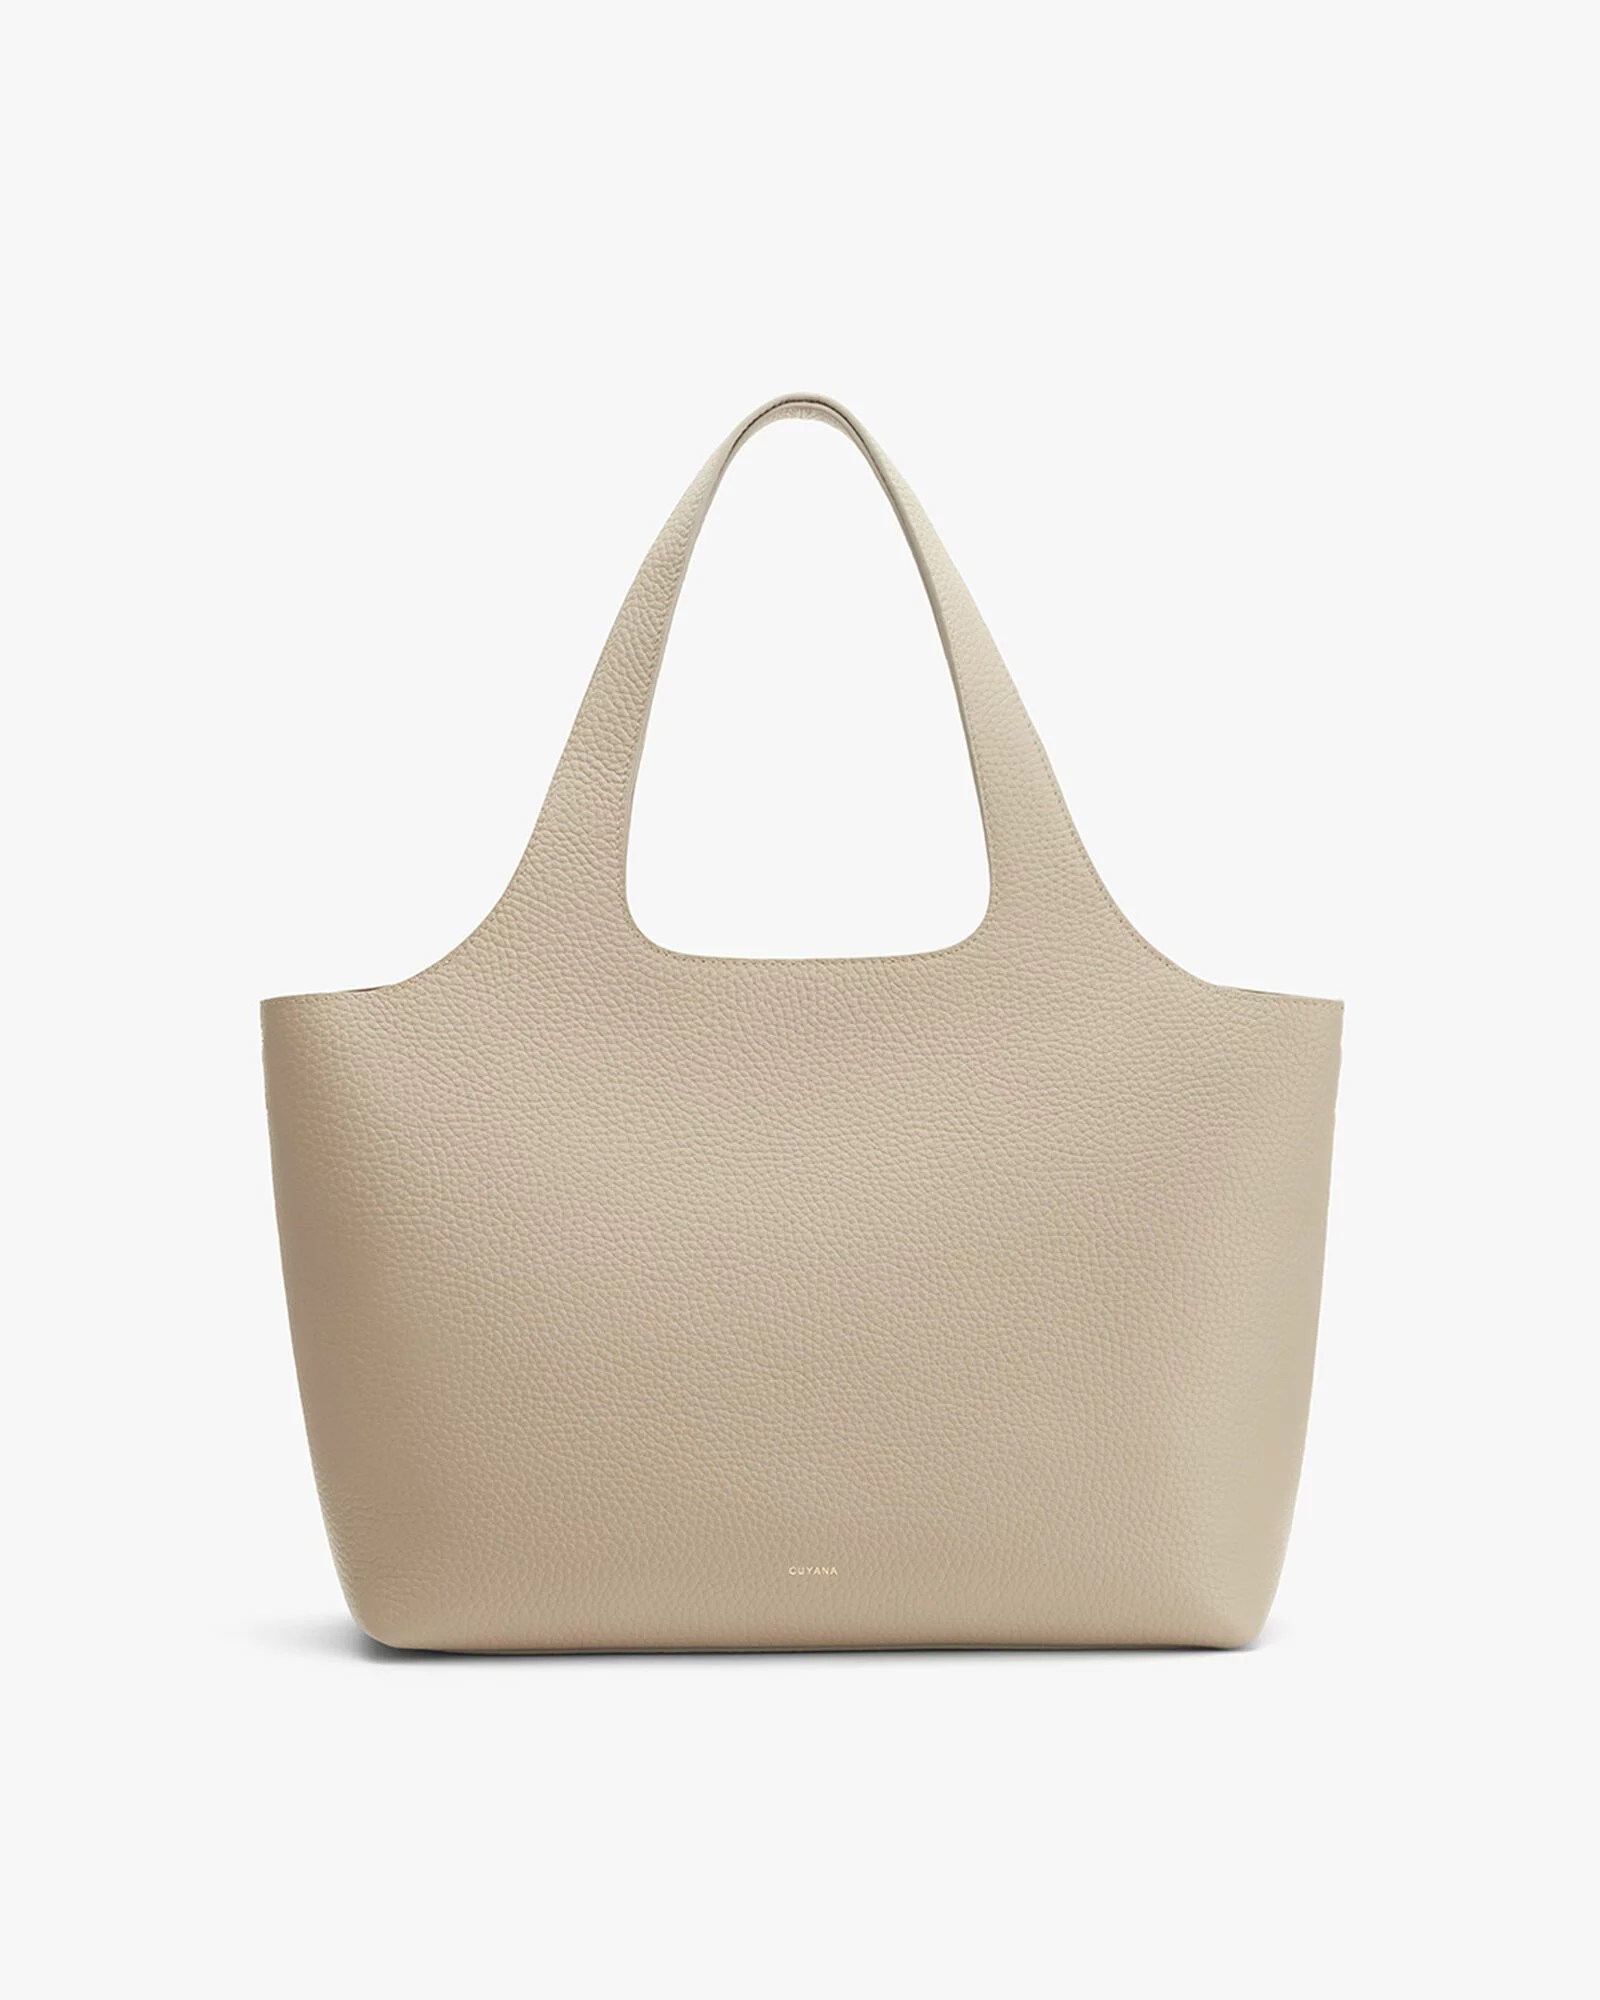 cuyana systems tote